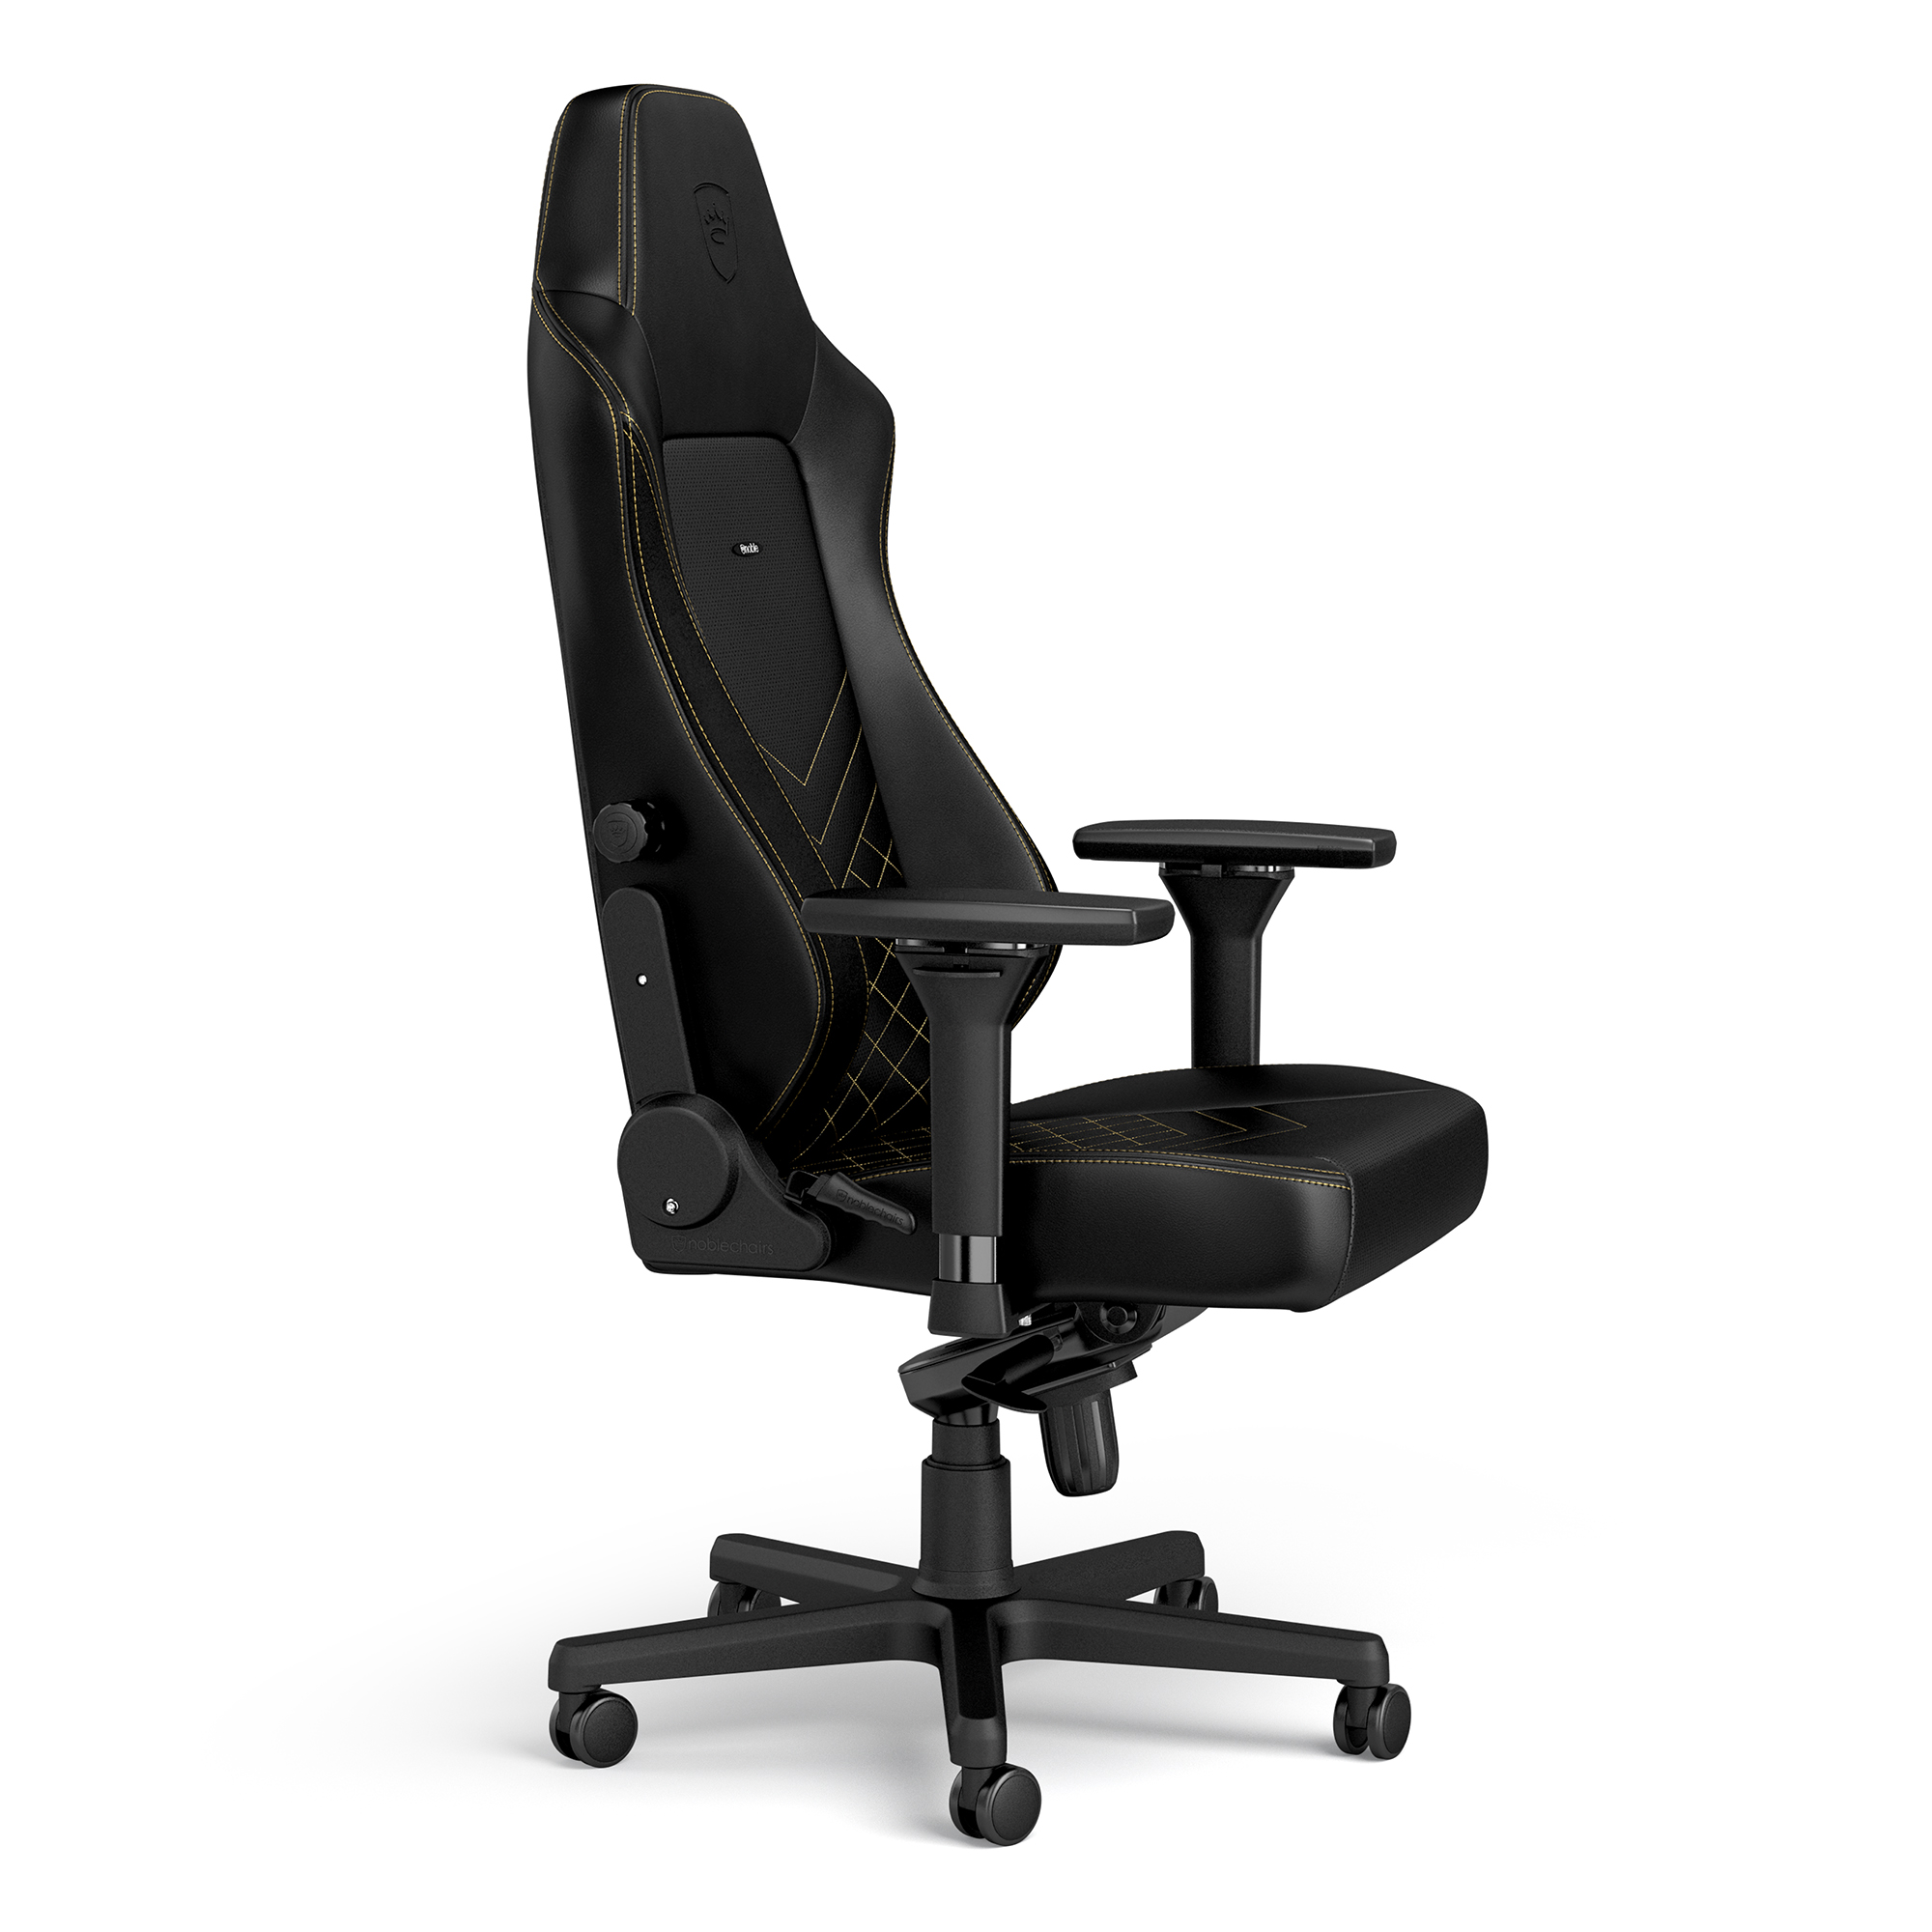 noblechairs - noblechairs HERO Gaming Chair - Black/Gold